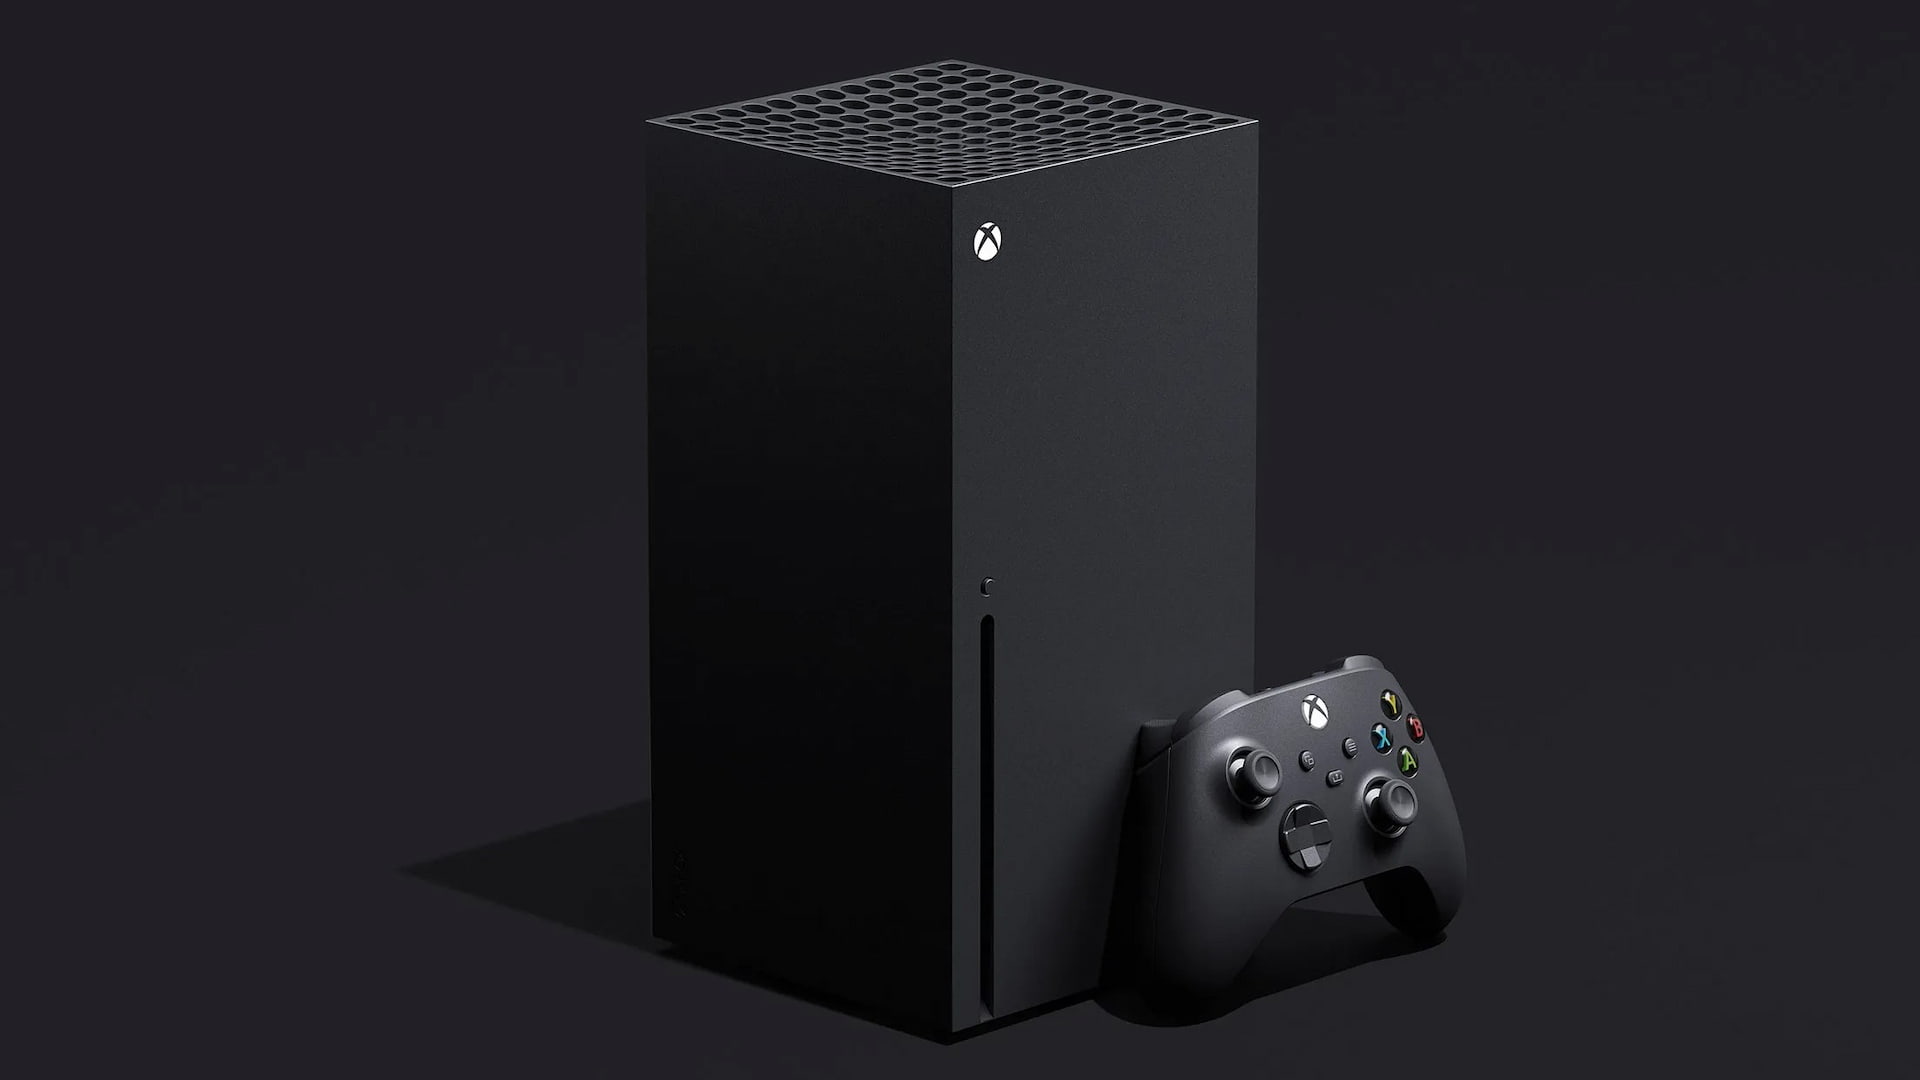 Xbox 2023: What to Expect Exclusives & Rumors [Xbox Series X/S] 